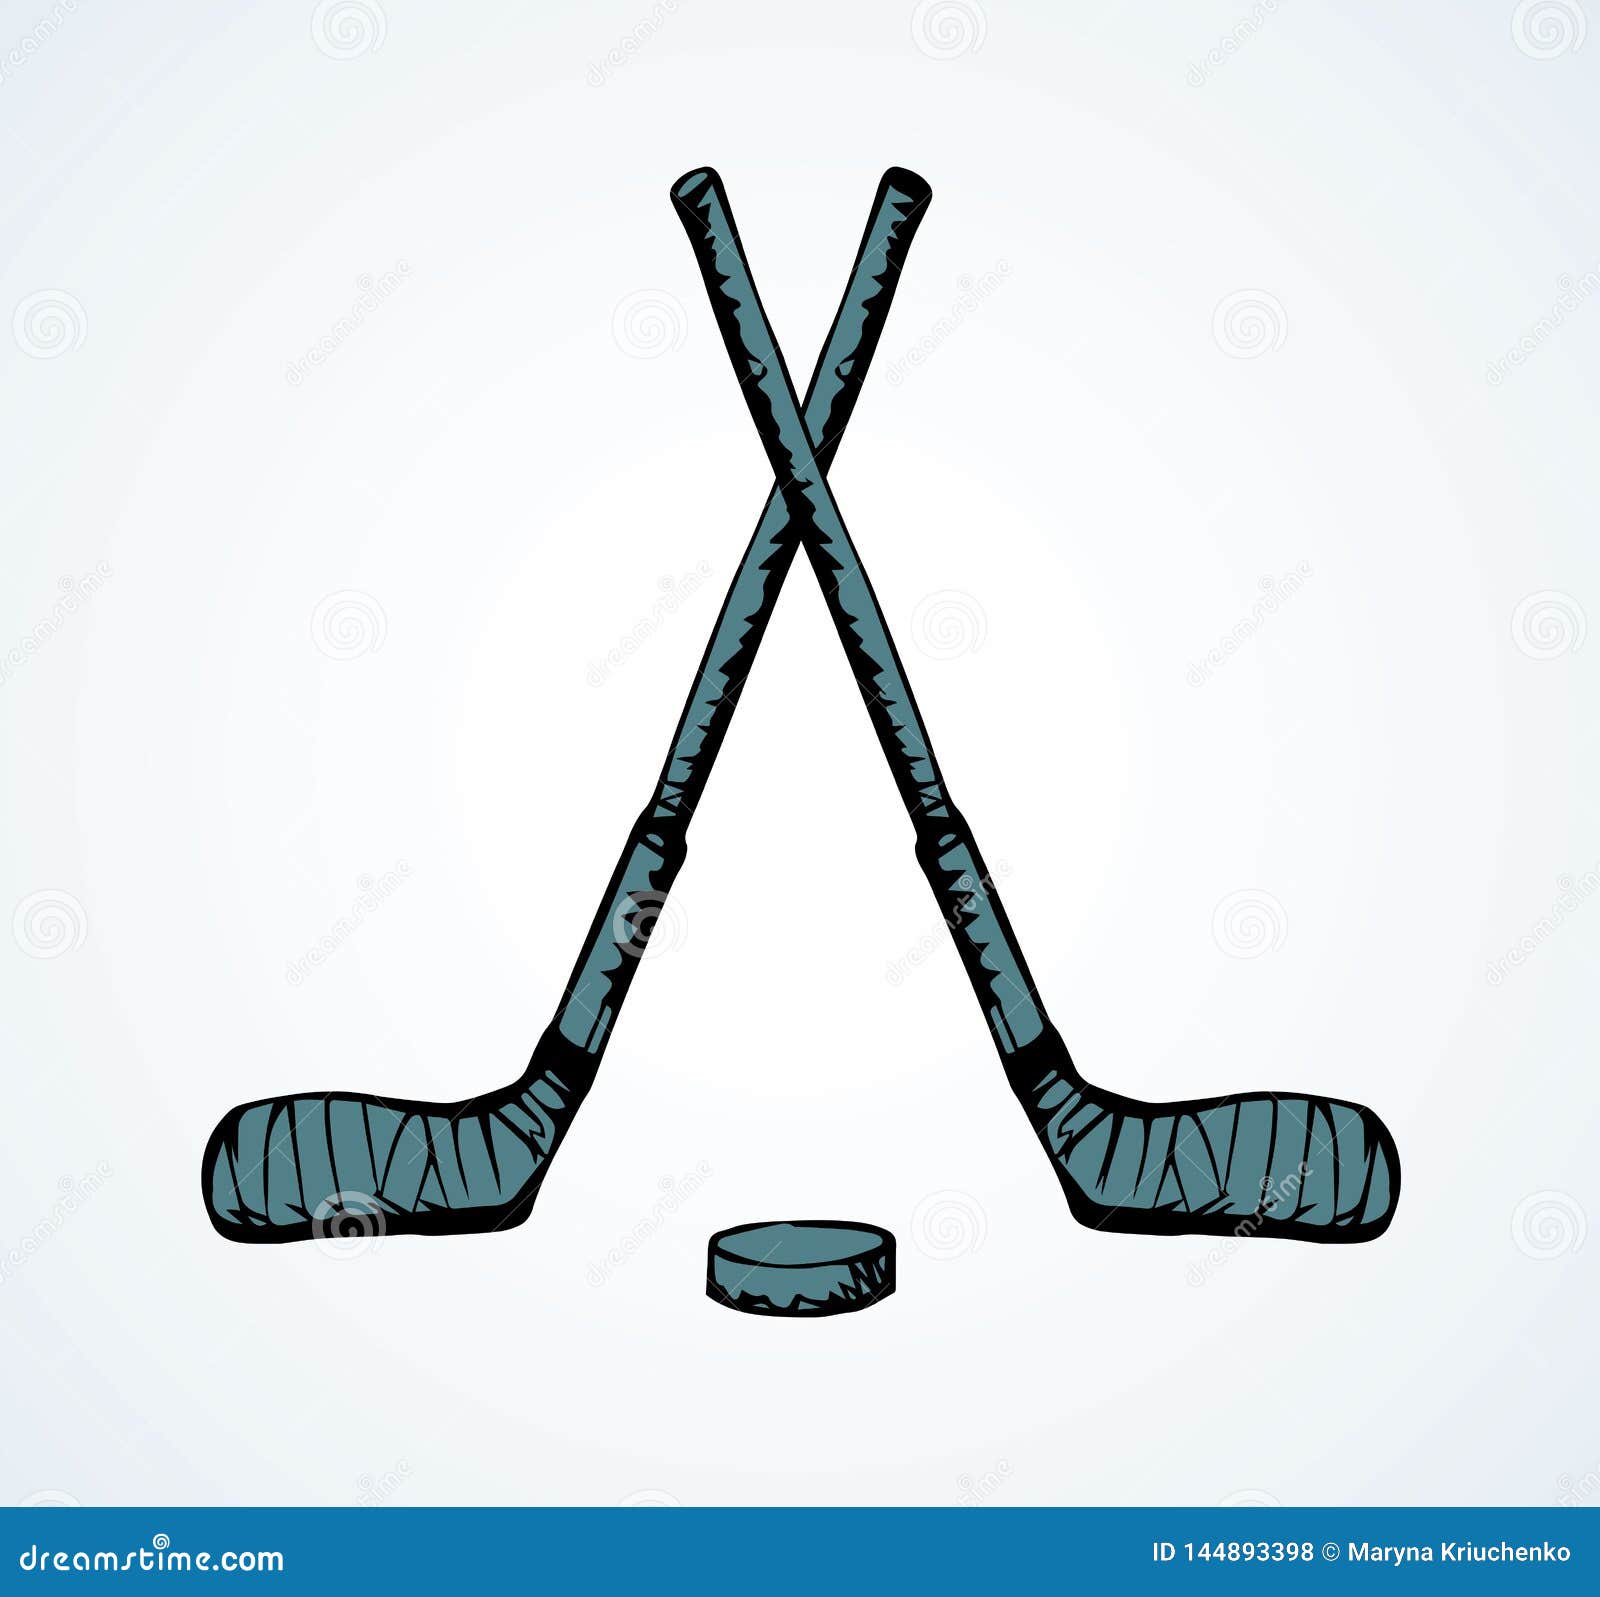 field, hand, contour, goalie, leisure, cold, isolated, hockey, doodle, draw...